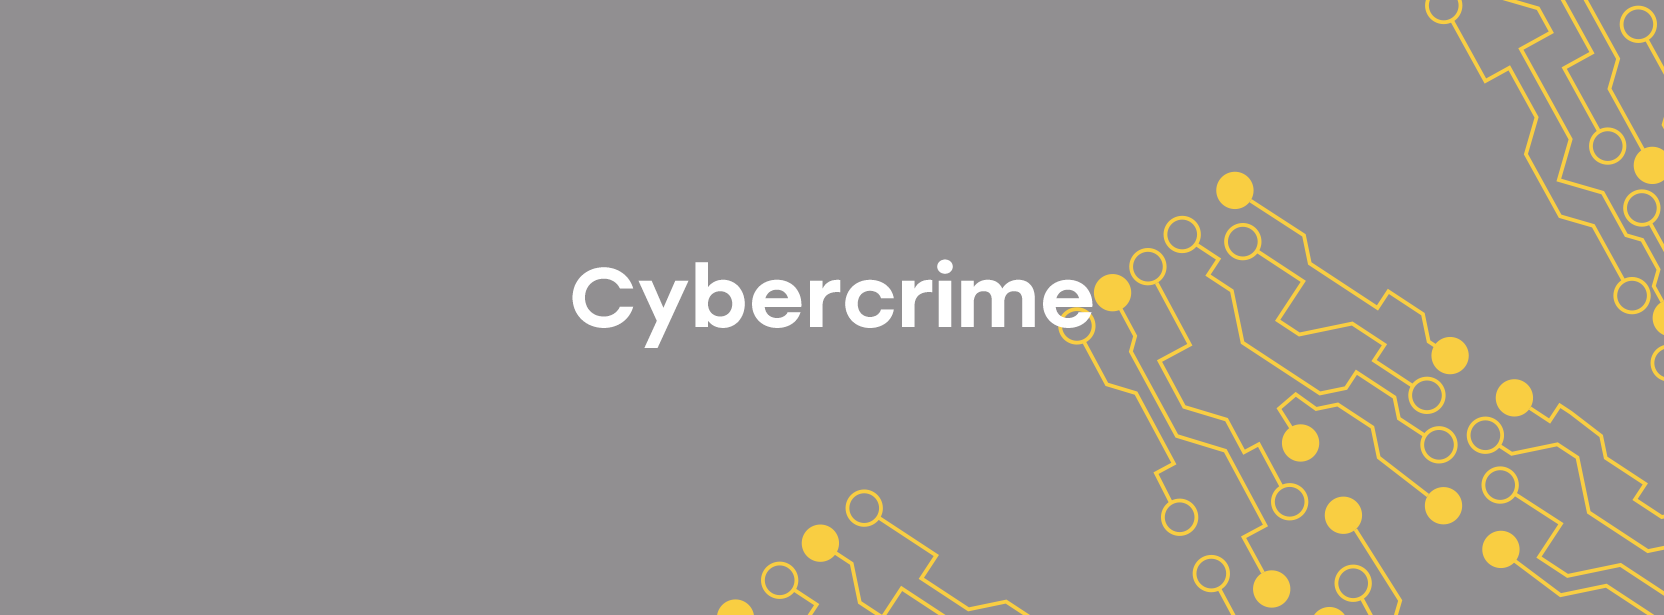 images/Cybercrime_Banner_Witte-Boussen.png